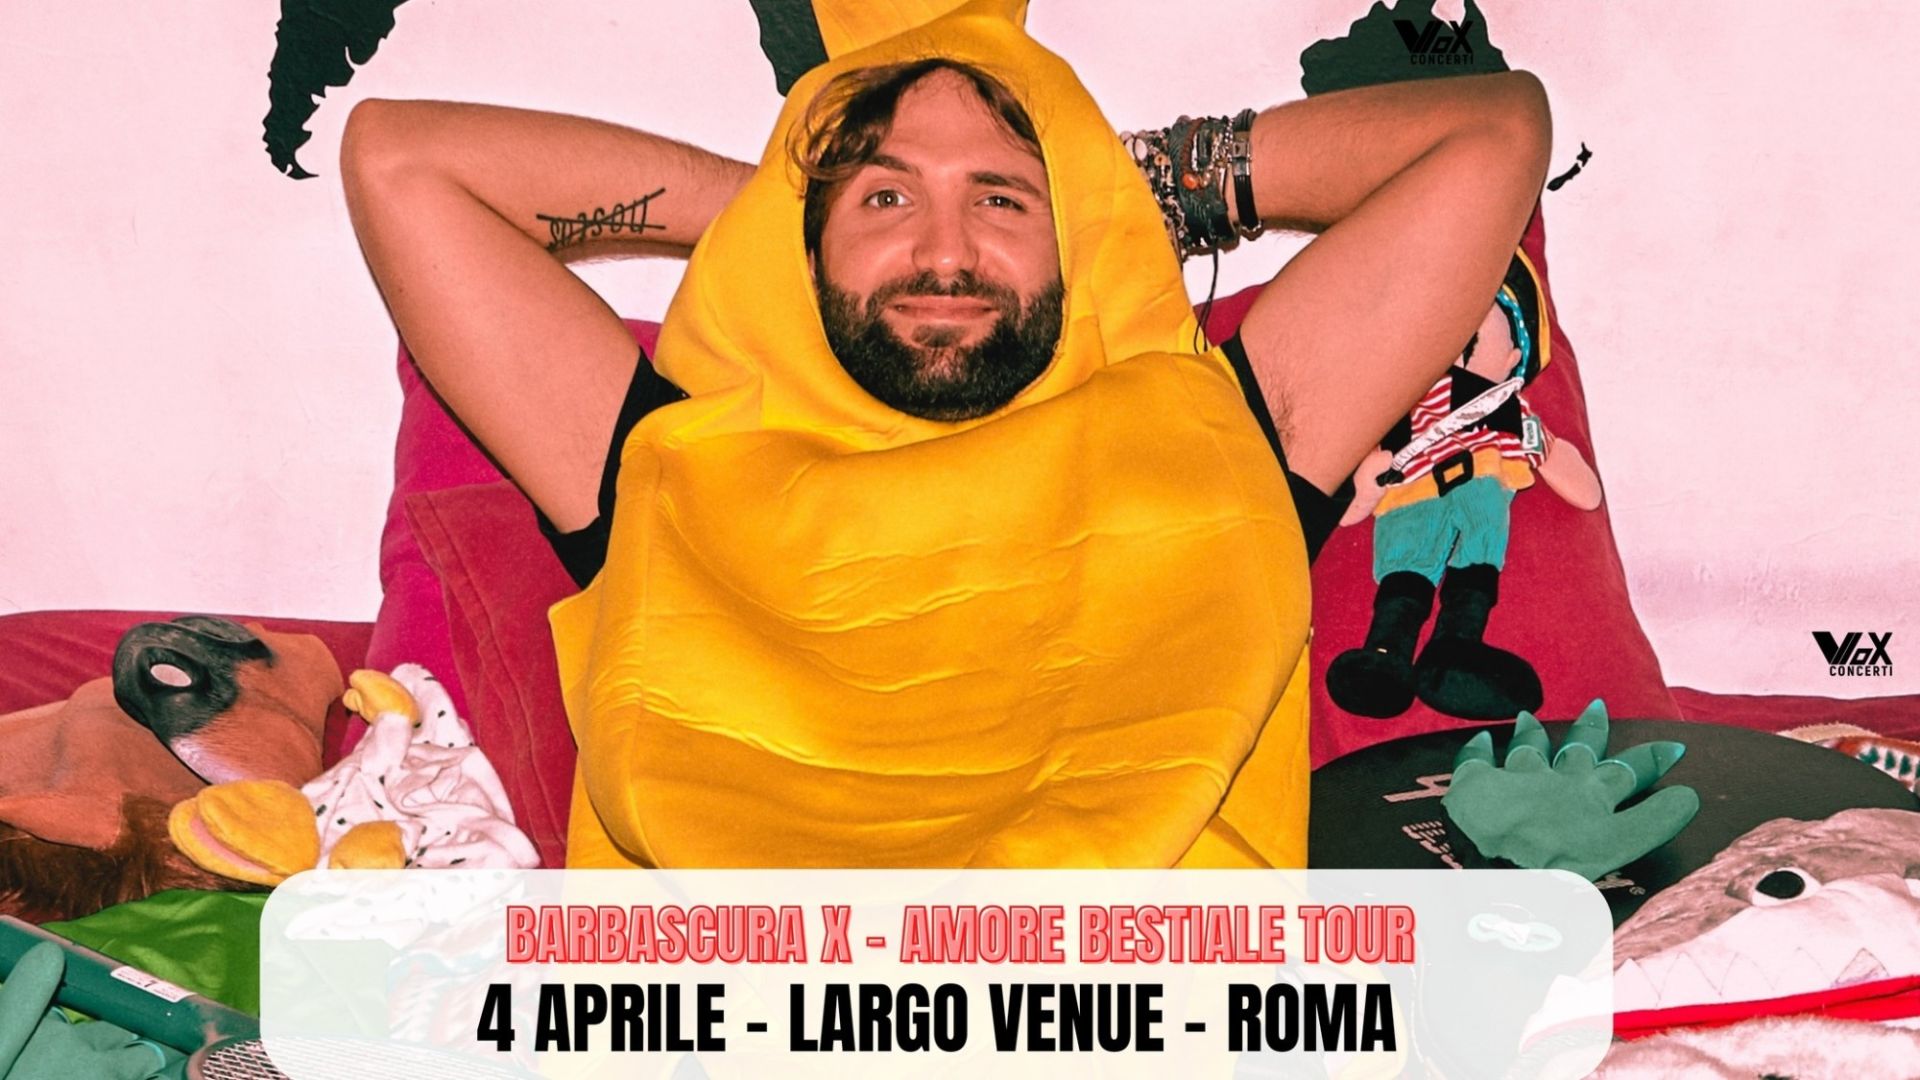 Barbascura X - "Amore Bestiale Tour"